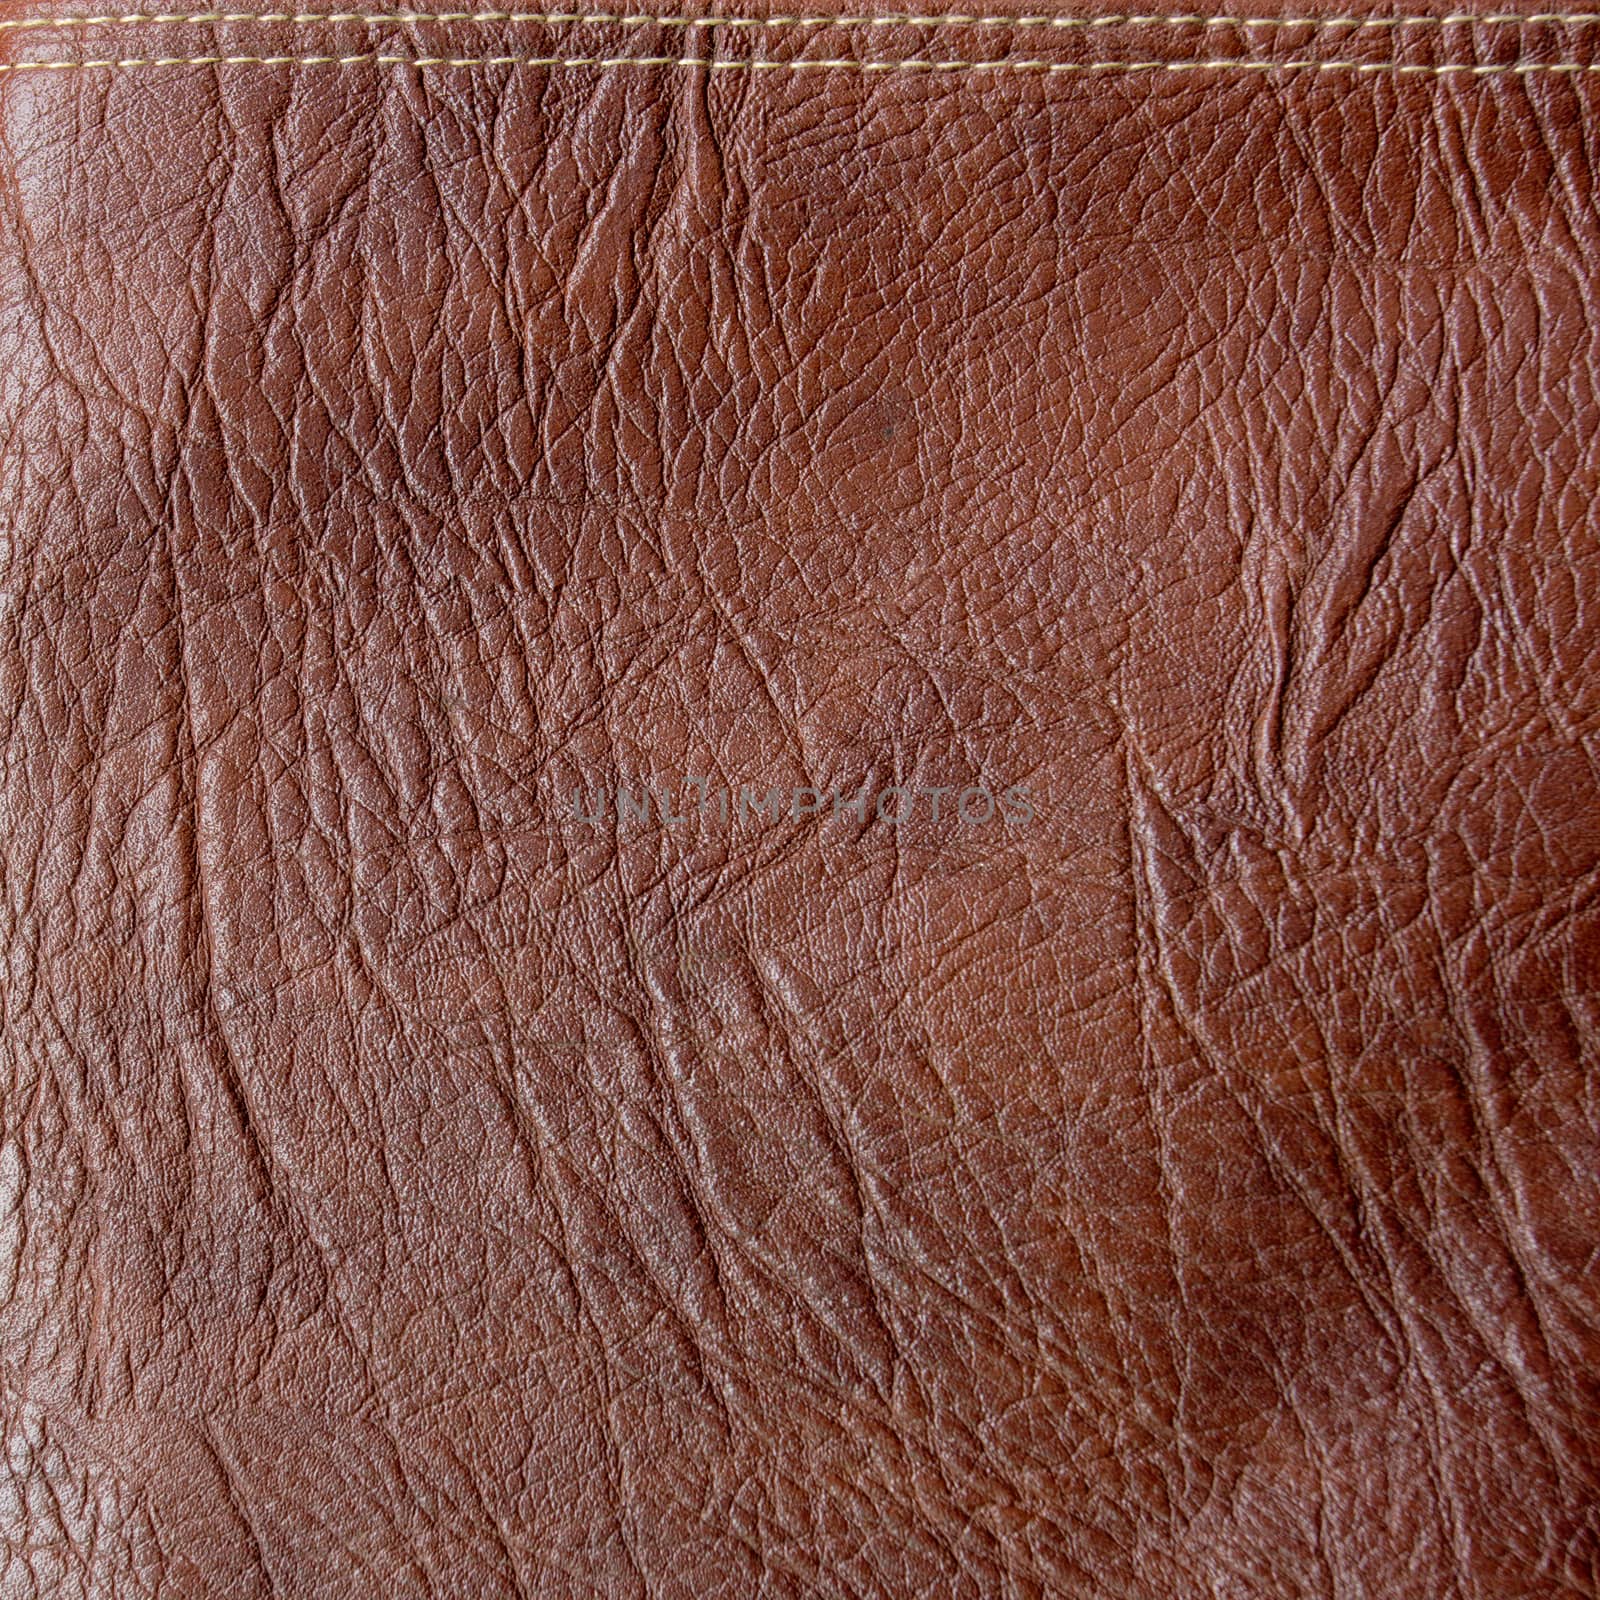 Texture of brown leather  by wyoosumran